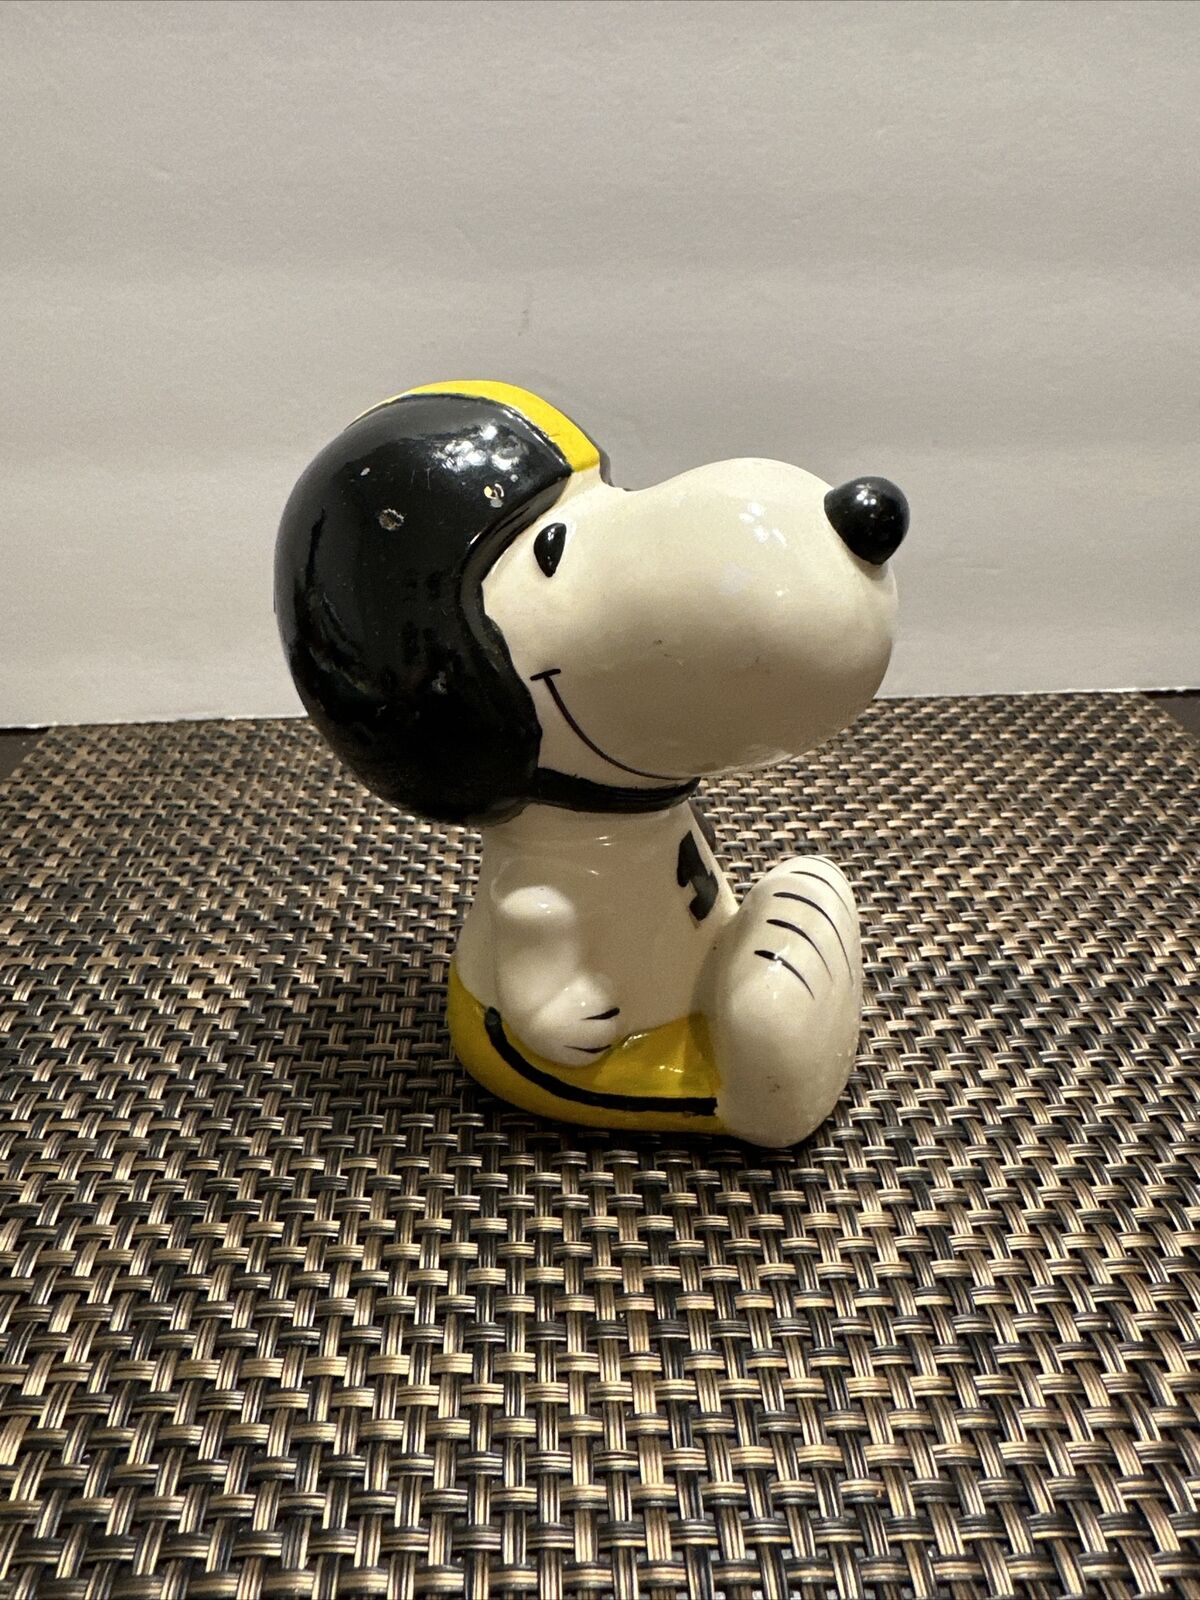 Vintage Snoopy Football Player Bank, United feature Syndicate Inc. Steelers?